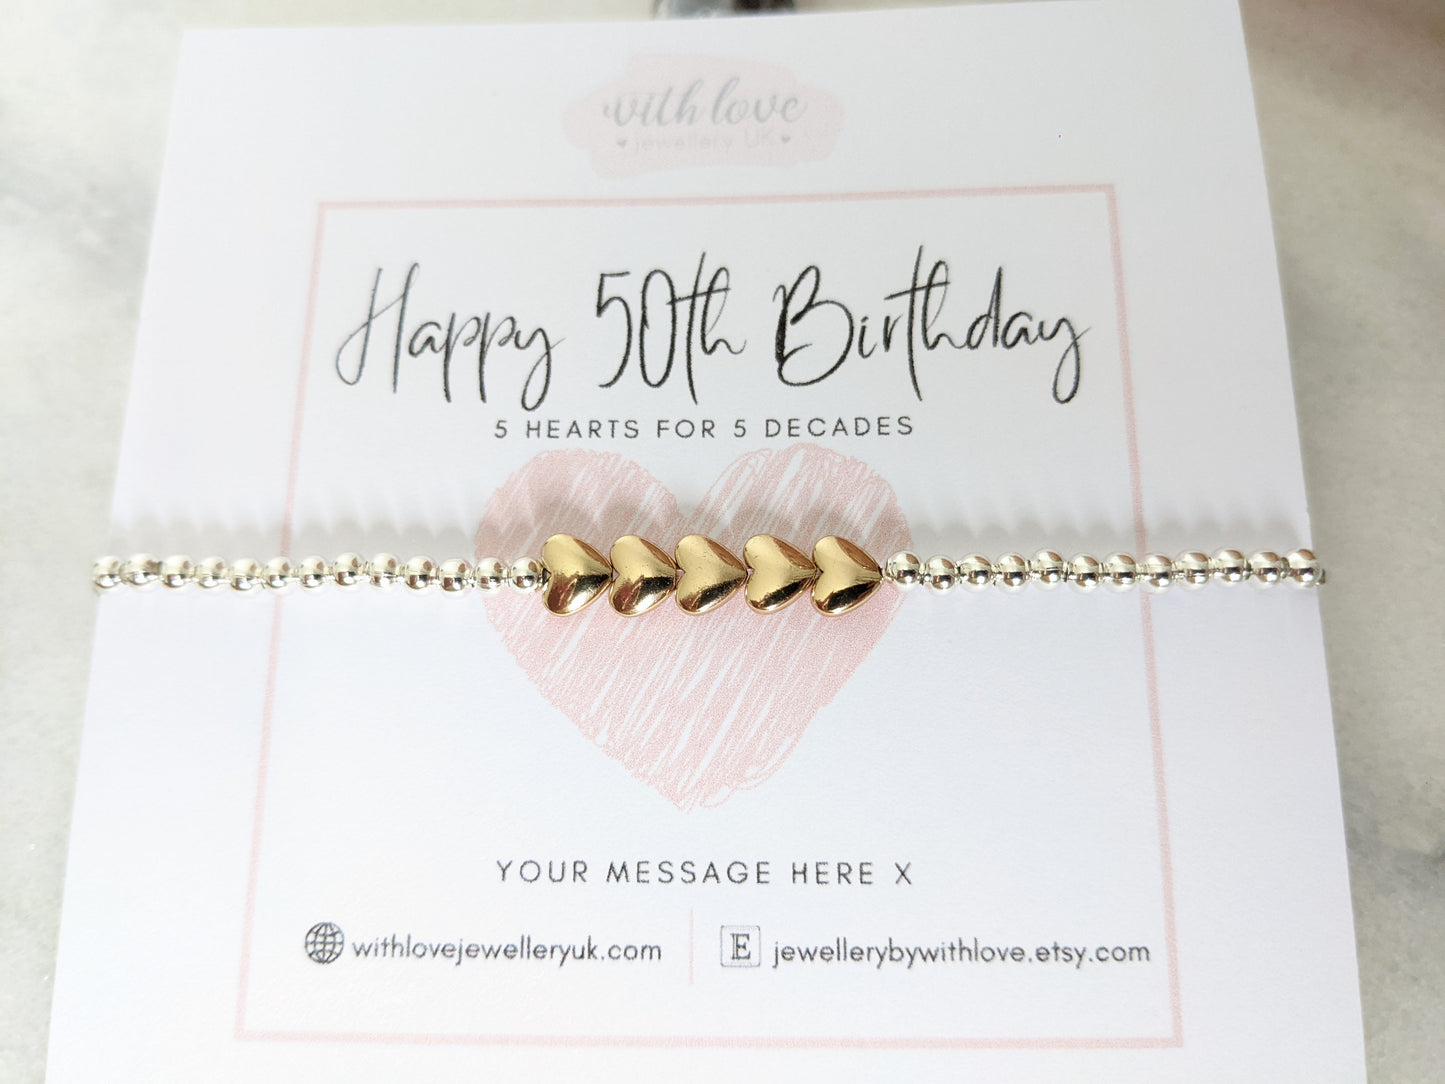 Heart Milestone Birthday Bracelet (20th, 30th, 40th, 50th, 60th, 70th, 80th or 90th birthday) FREE Personalised Message Card